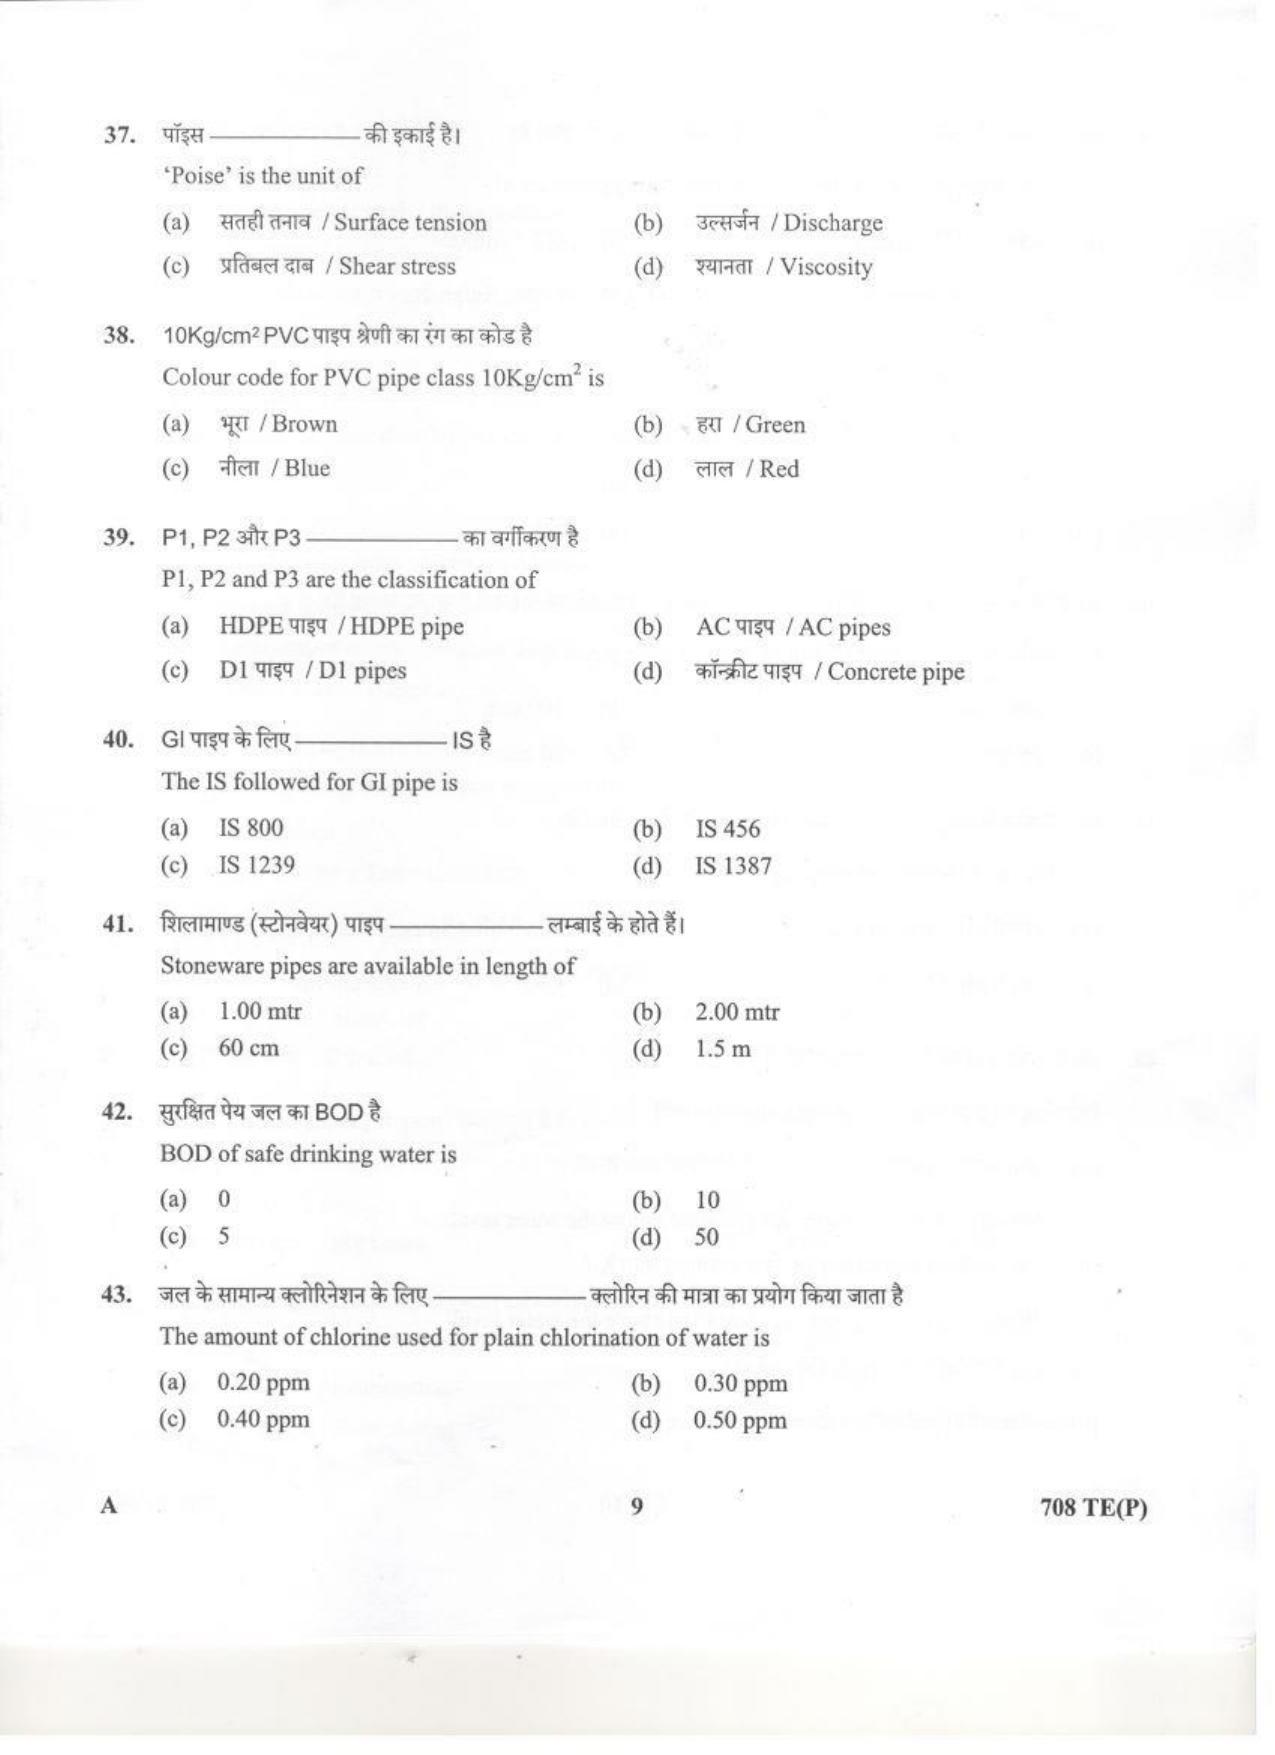 LPSC Technician ‘B’ (Plumber) 2020 Question Paper - Page 8